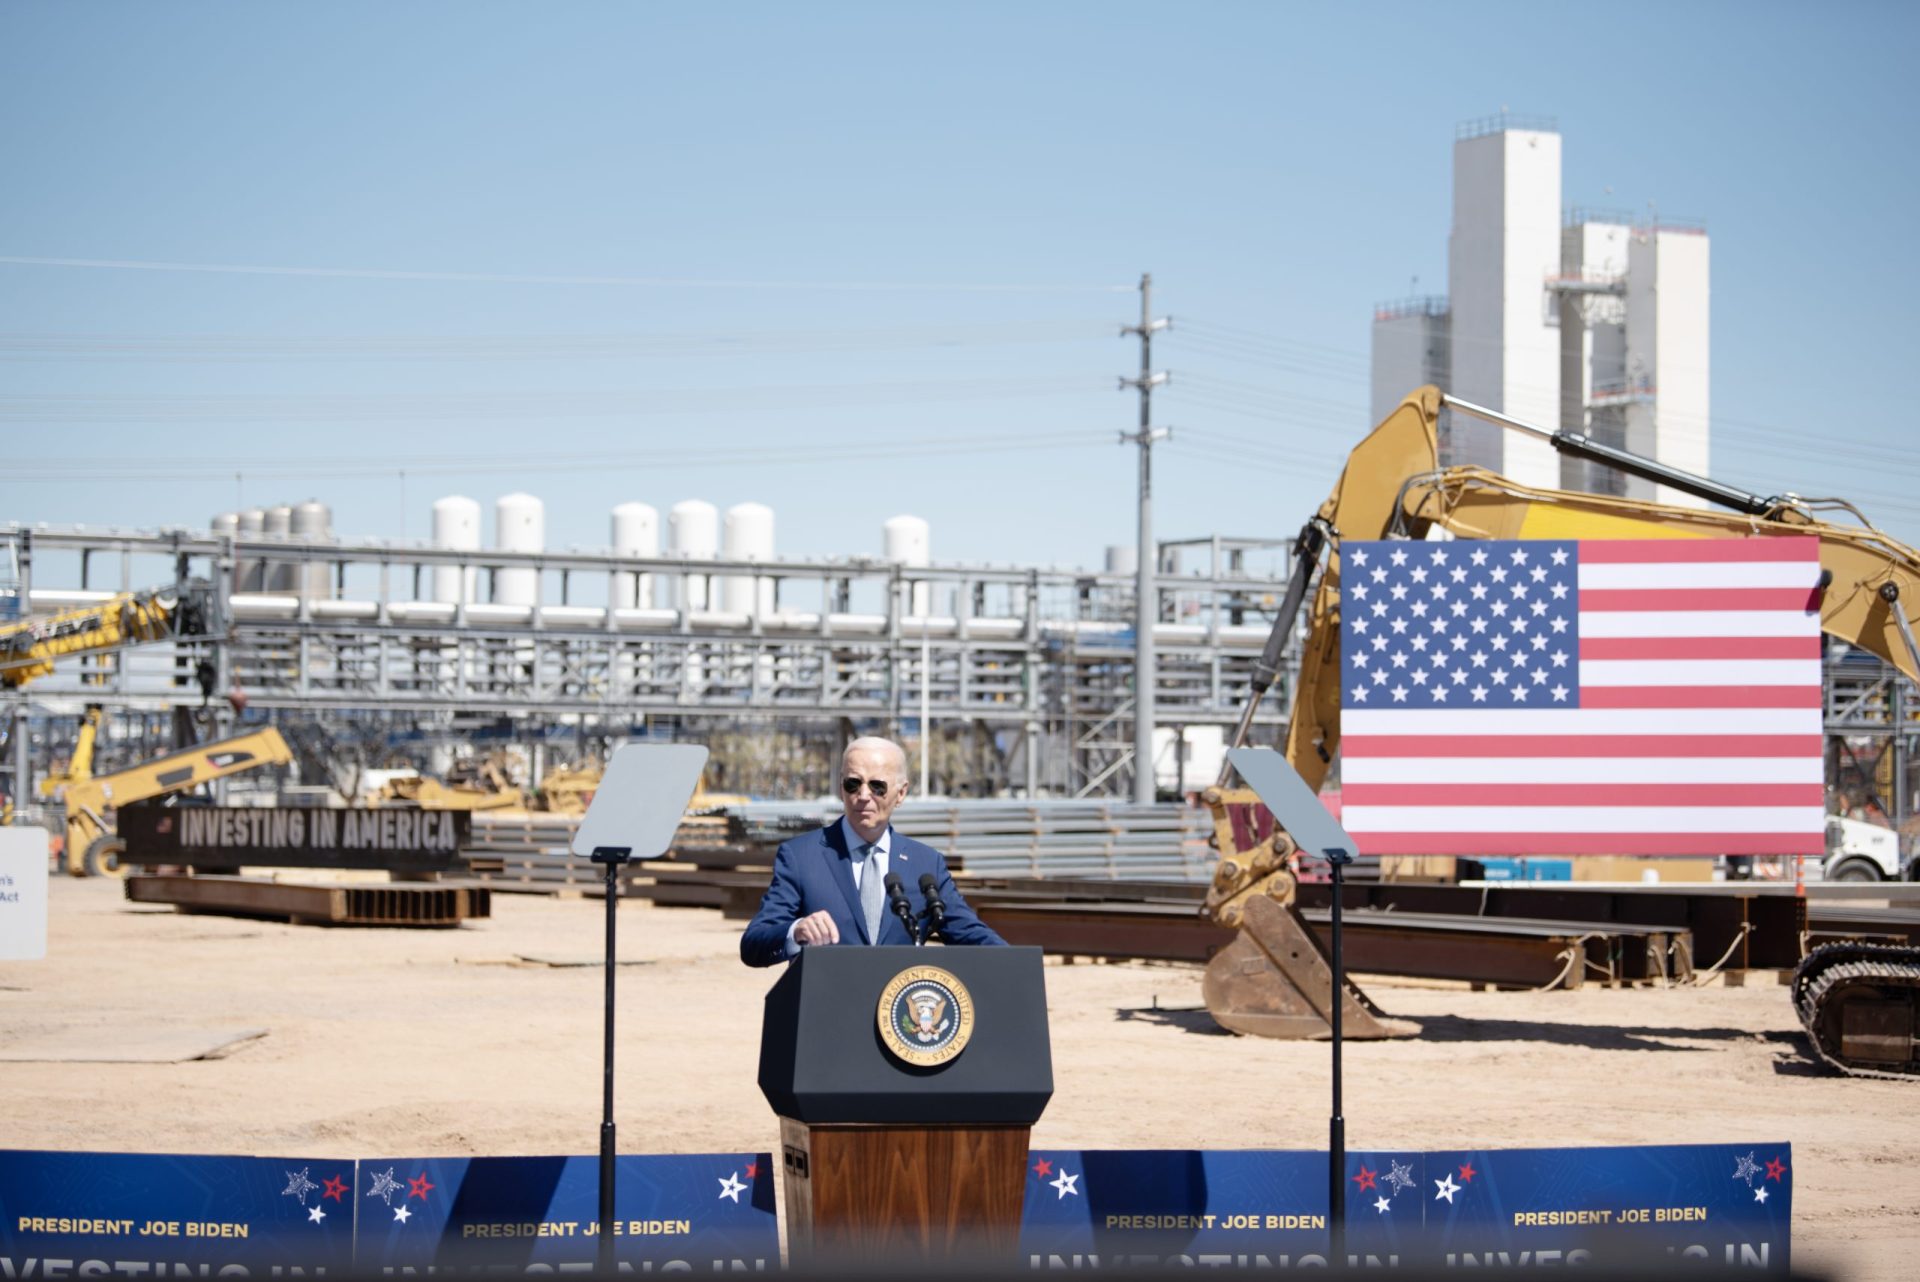 President Biden Visits the Valley to Announce Semiconductor Investment